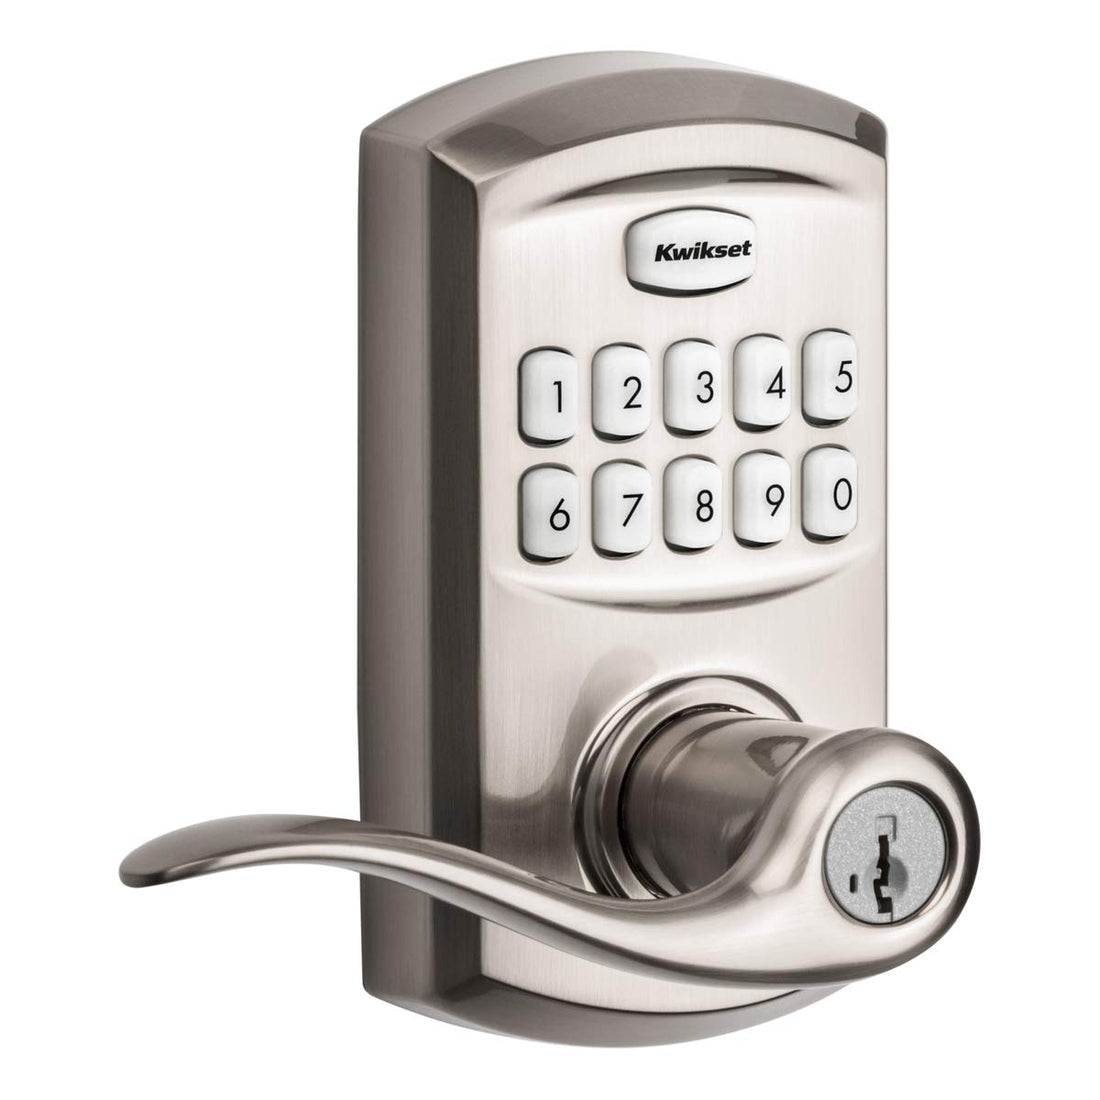 Kwikset 99170-001 SmartCode 917 Keypad Keyless Entry Traditional Residential Electronic Lever Deadbolt Alternative with Tustin Door Handle and SmartKey Security, Satin Nickel